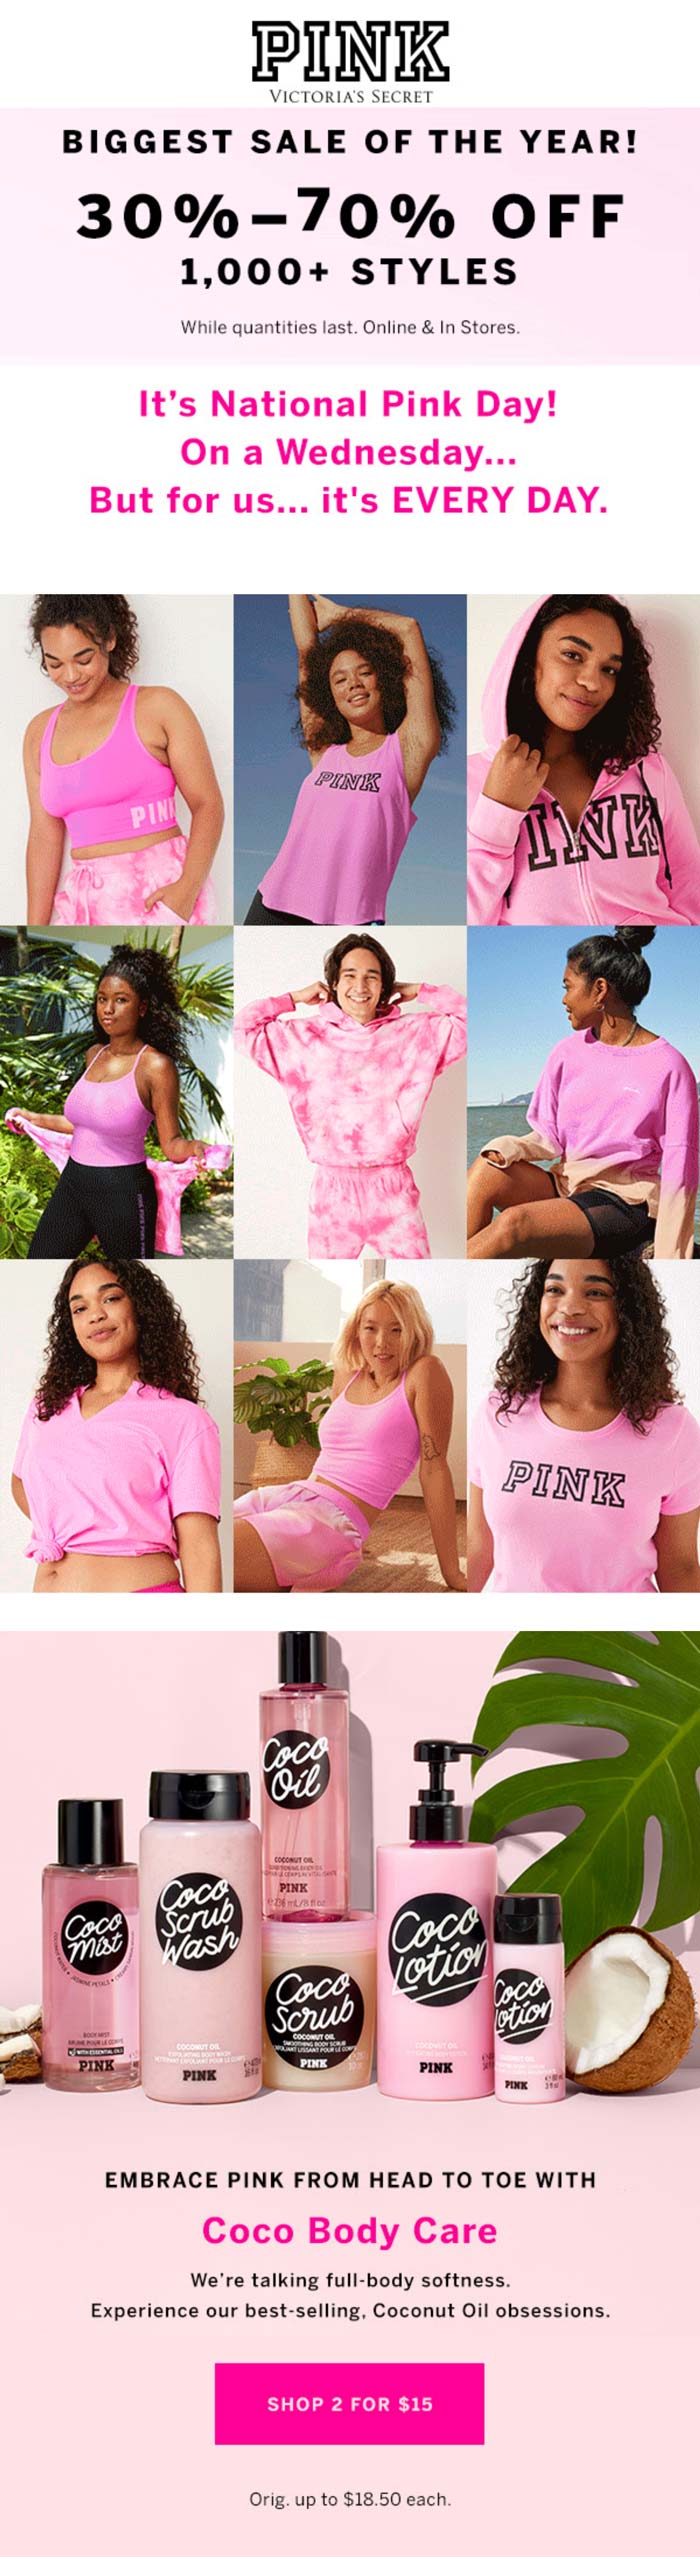 3070 off at Victorias Secret PINK, ditto online pink The Coupons App®